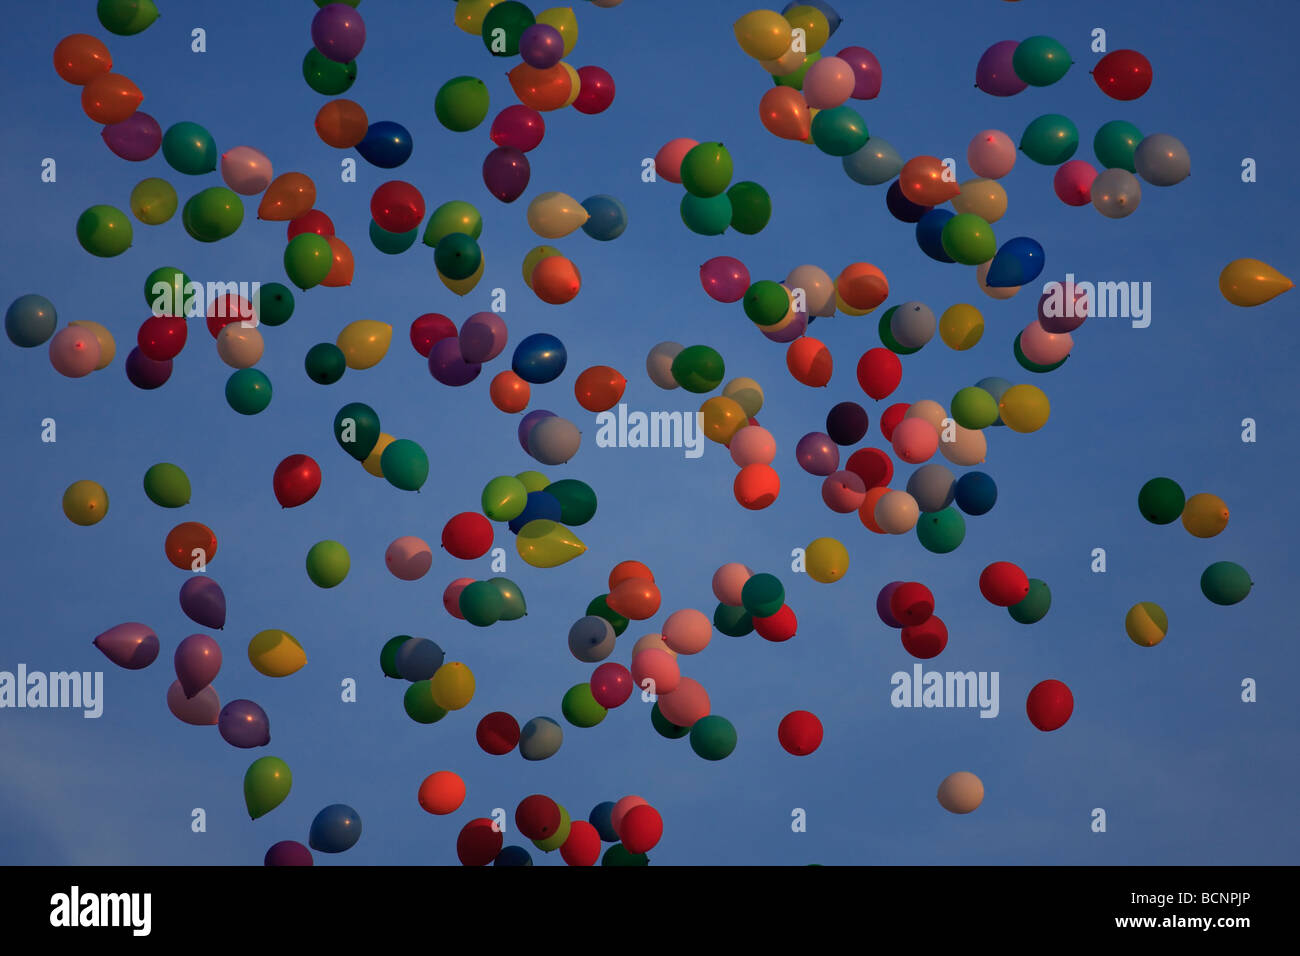 Balloons filled with helium floating away against a blue sky. Stock Photo